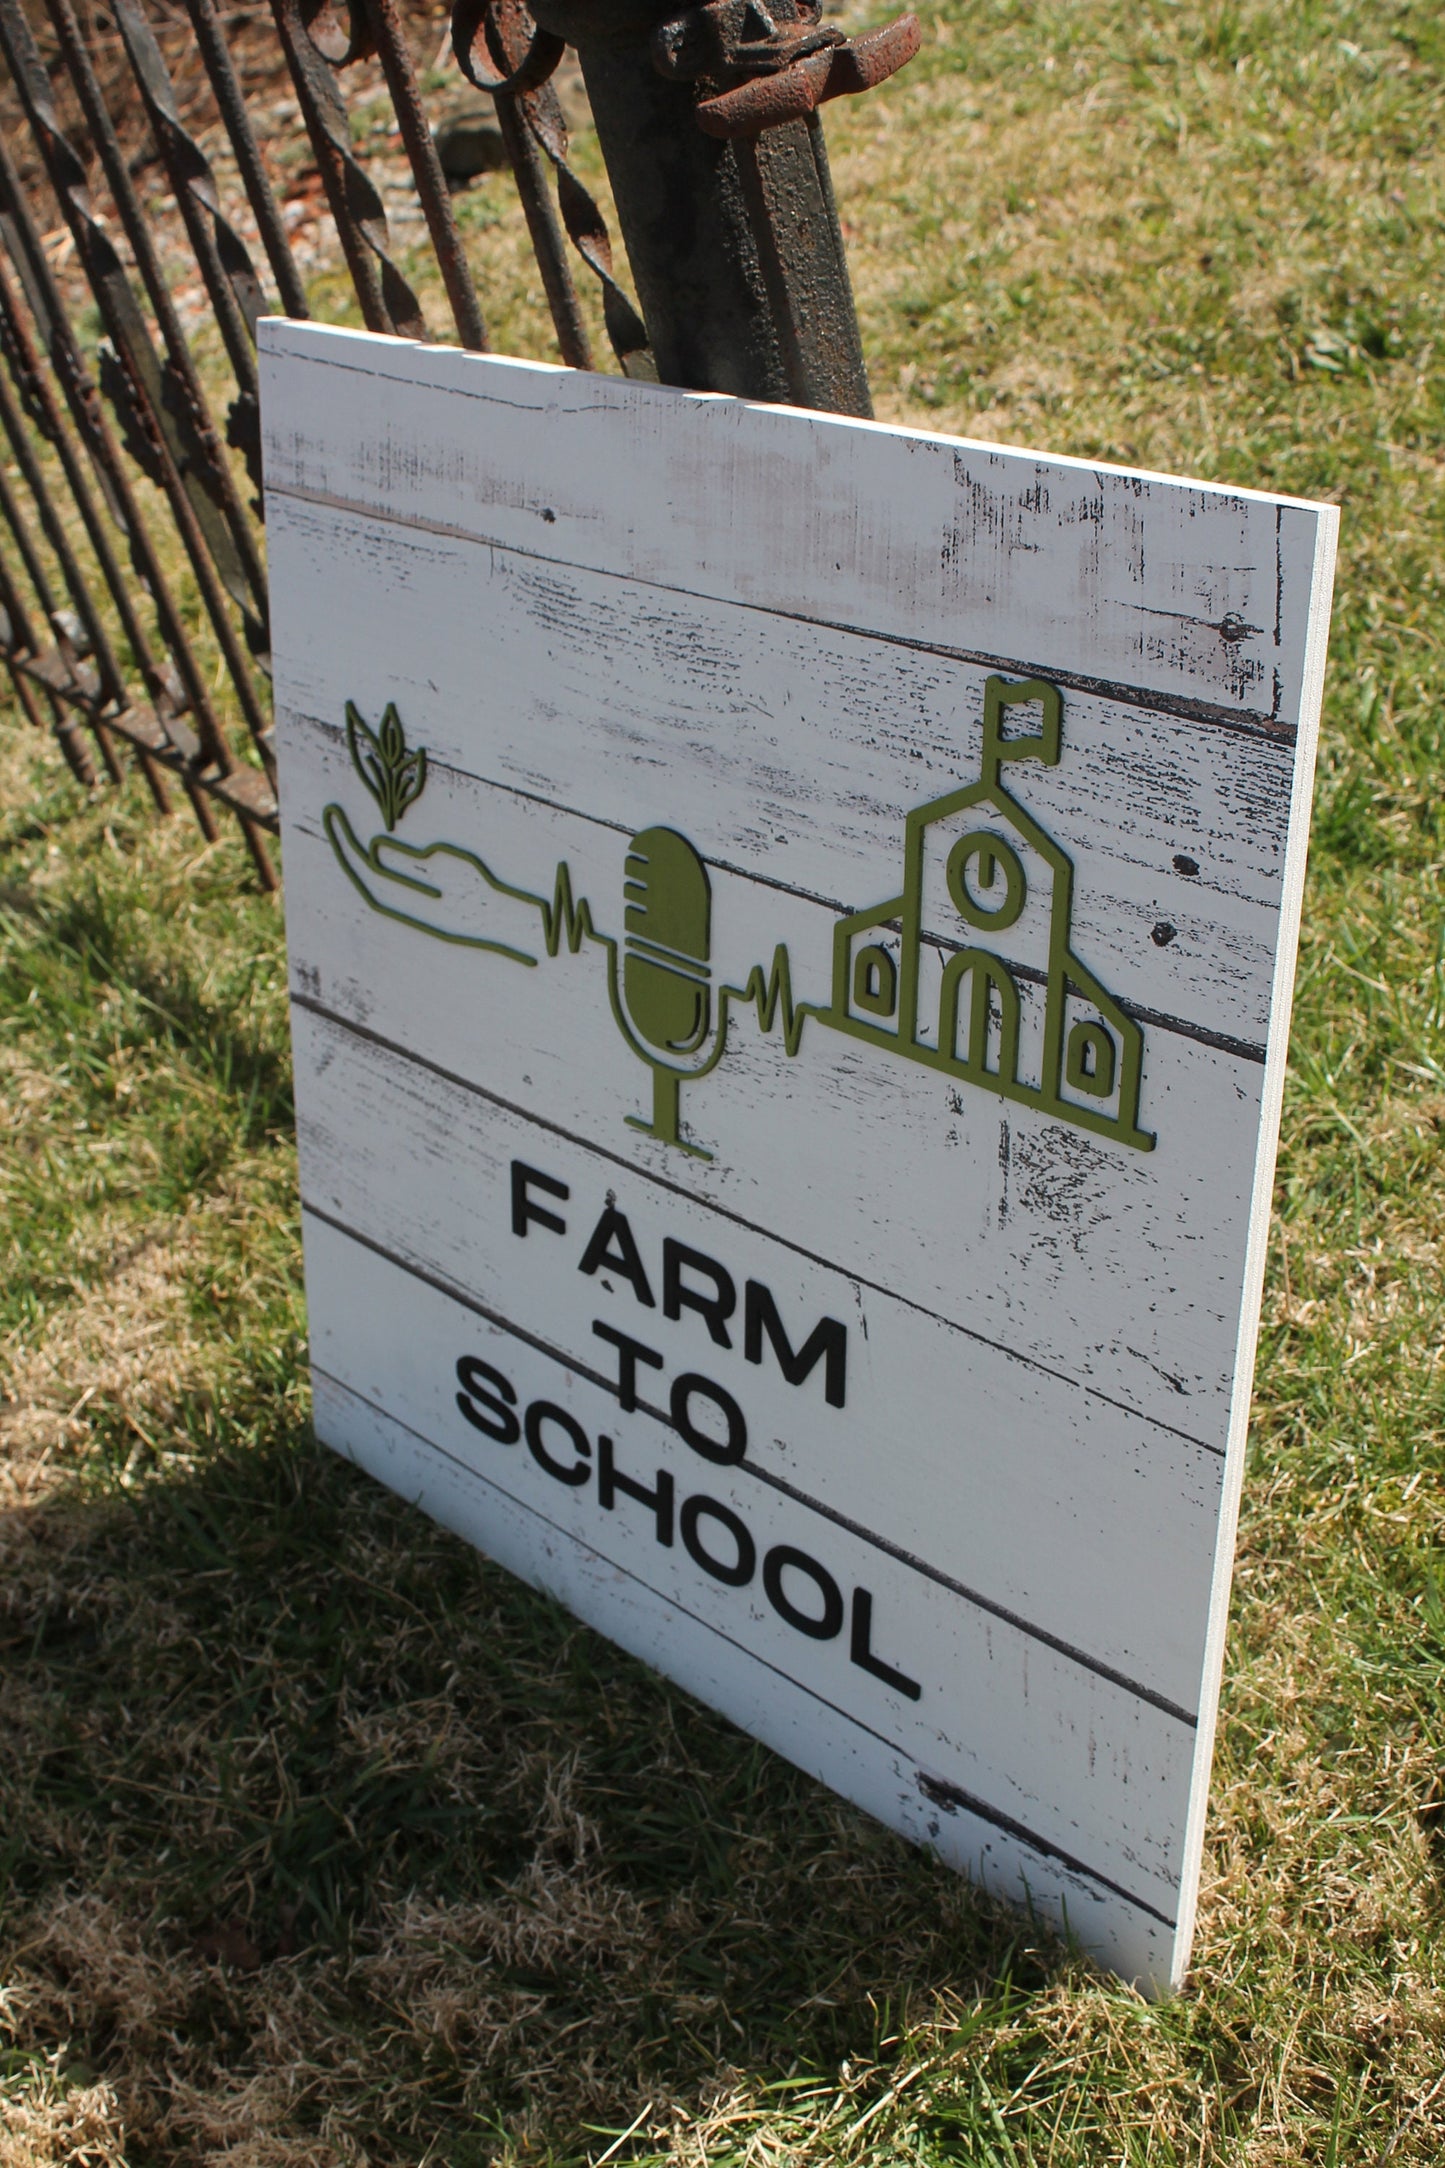 Farm to School Custom Sign Square Business Commerical Signage 3D 4H Grow Farming Food Teaching Education Made to Order Logo Wooden Handmade